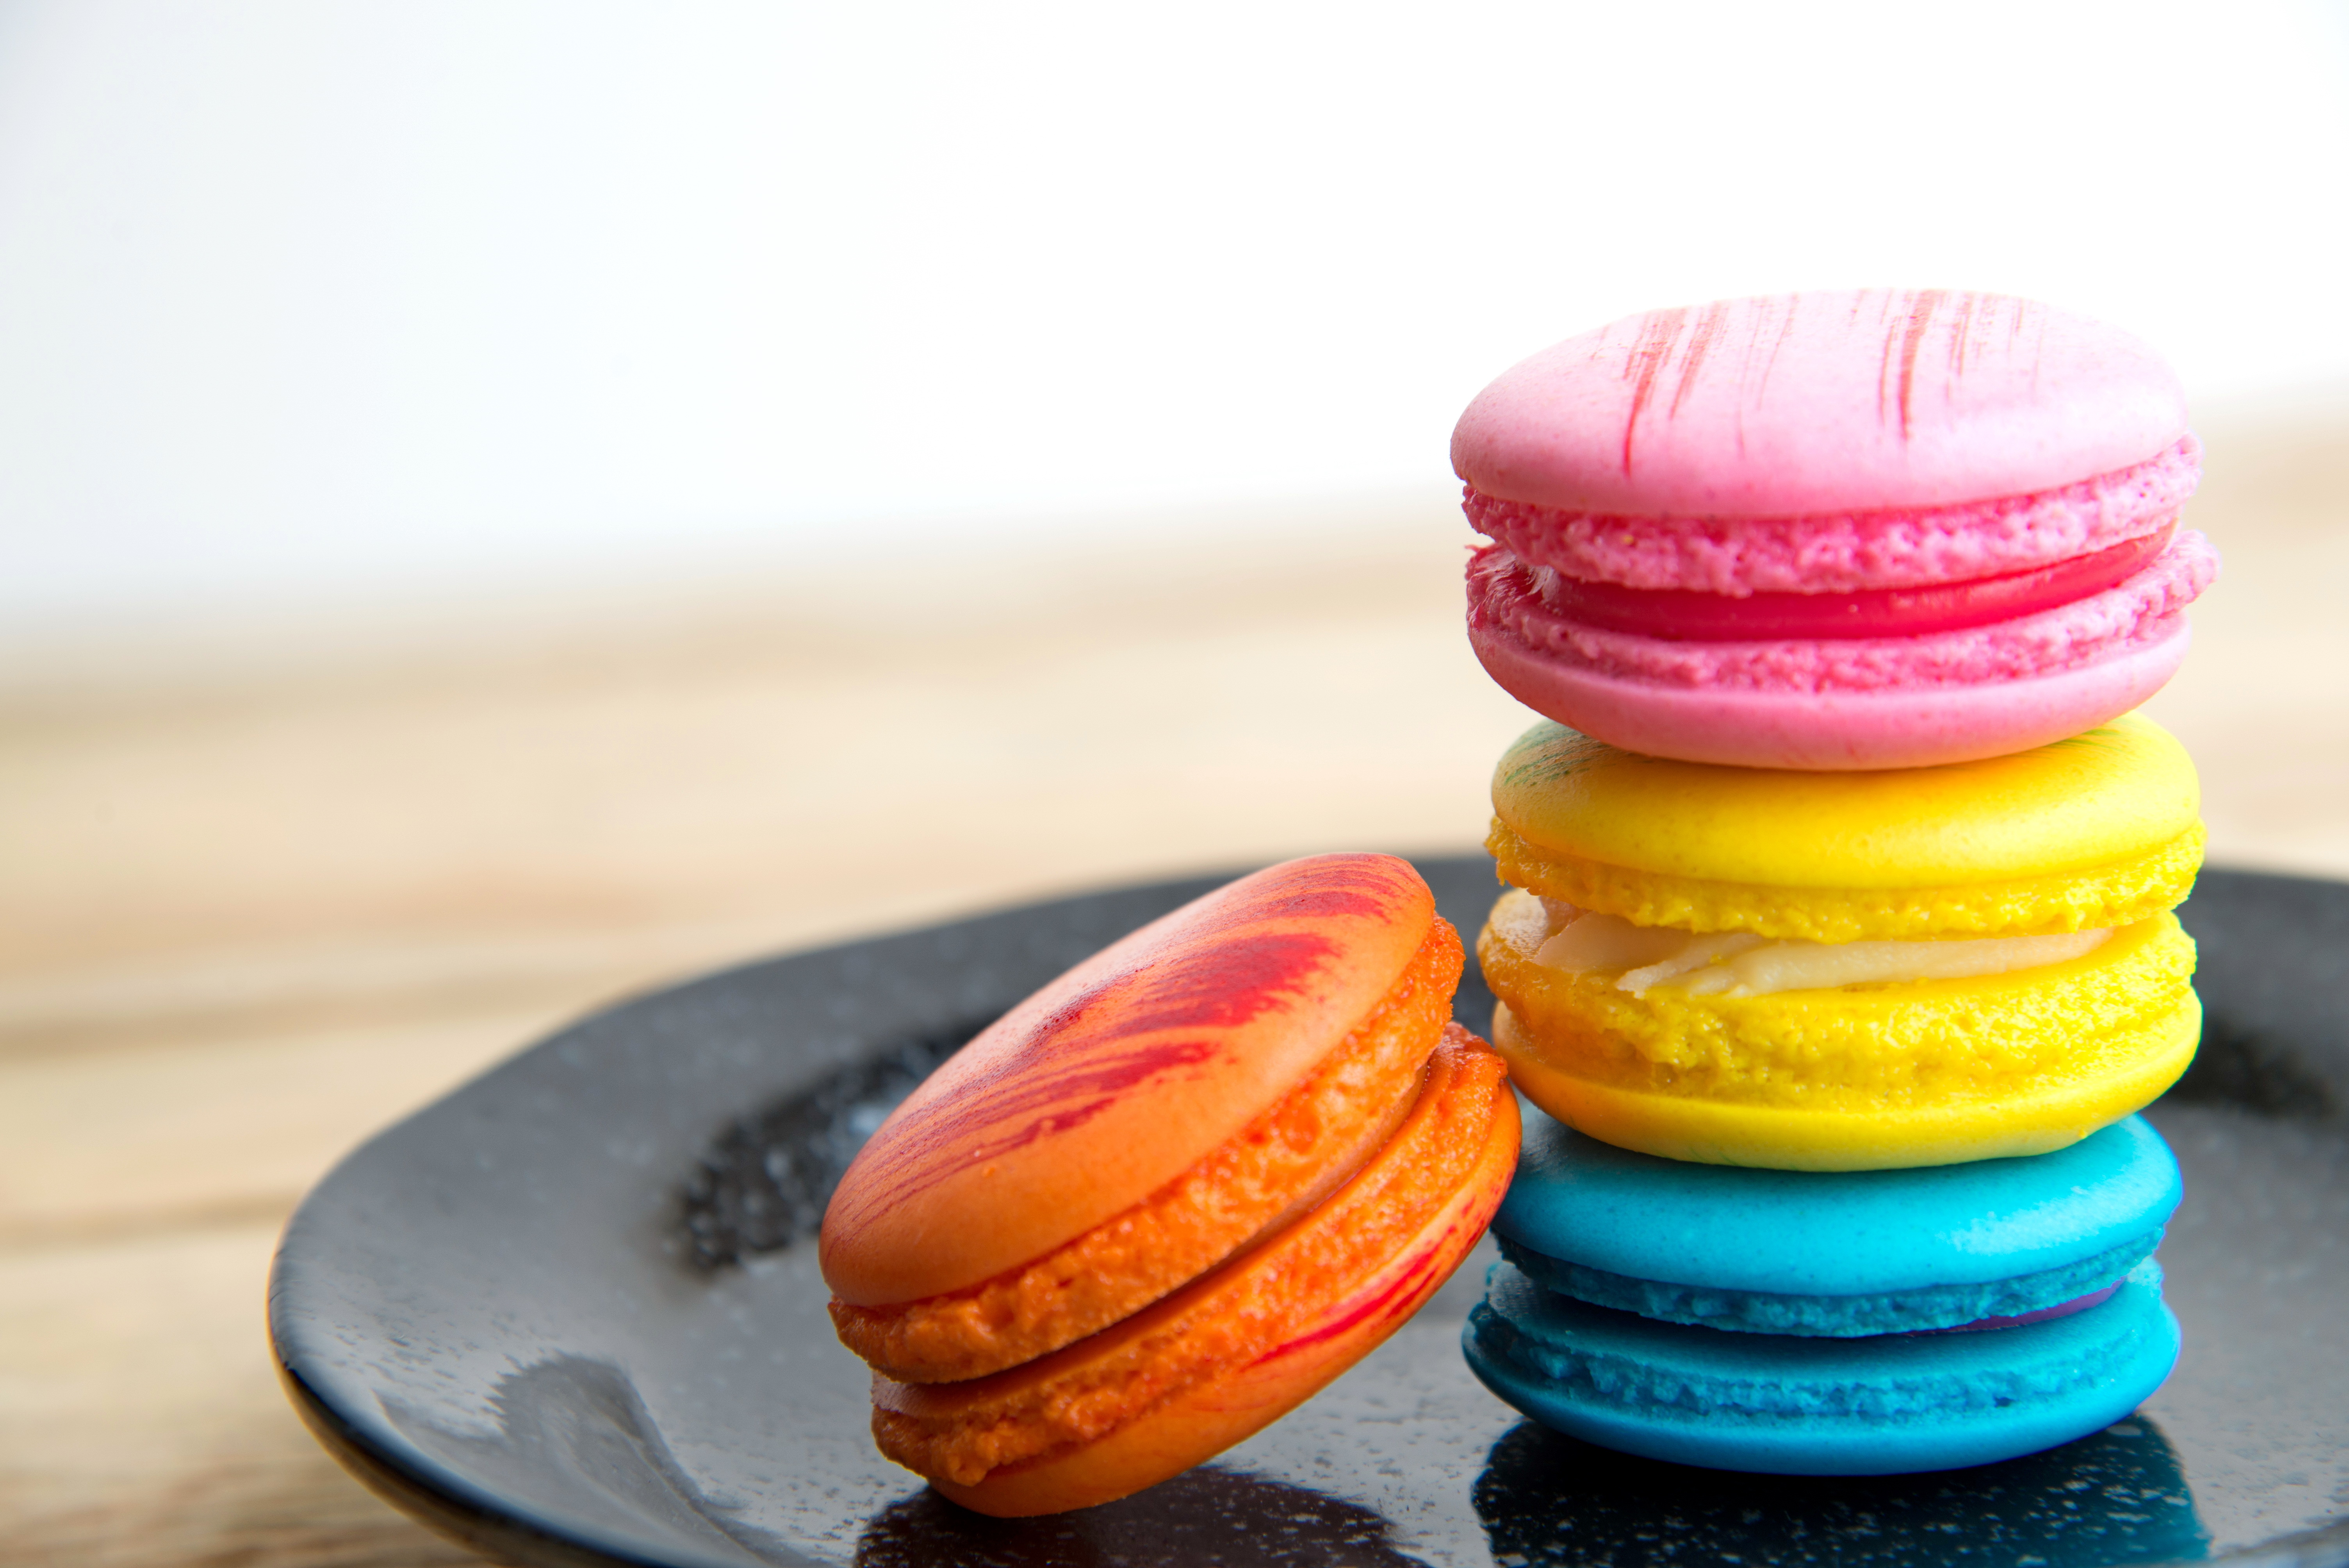 180+ 4K Macaron Wallpapers | Background Images